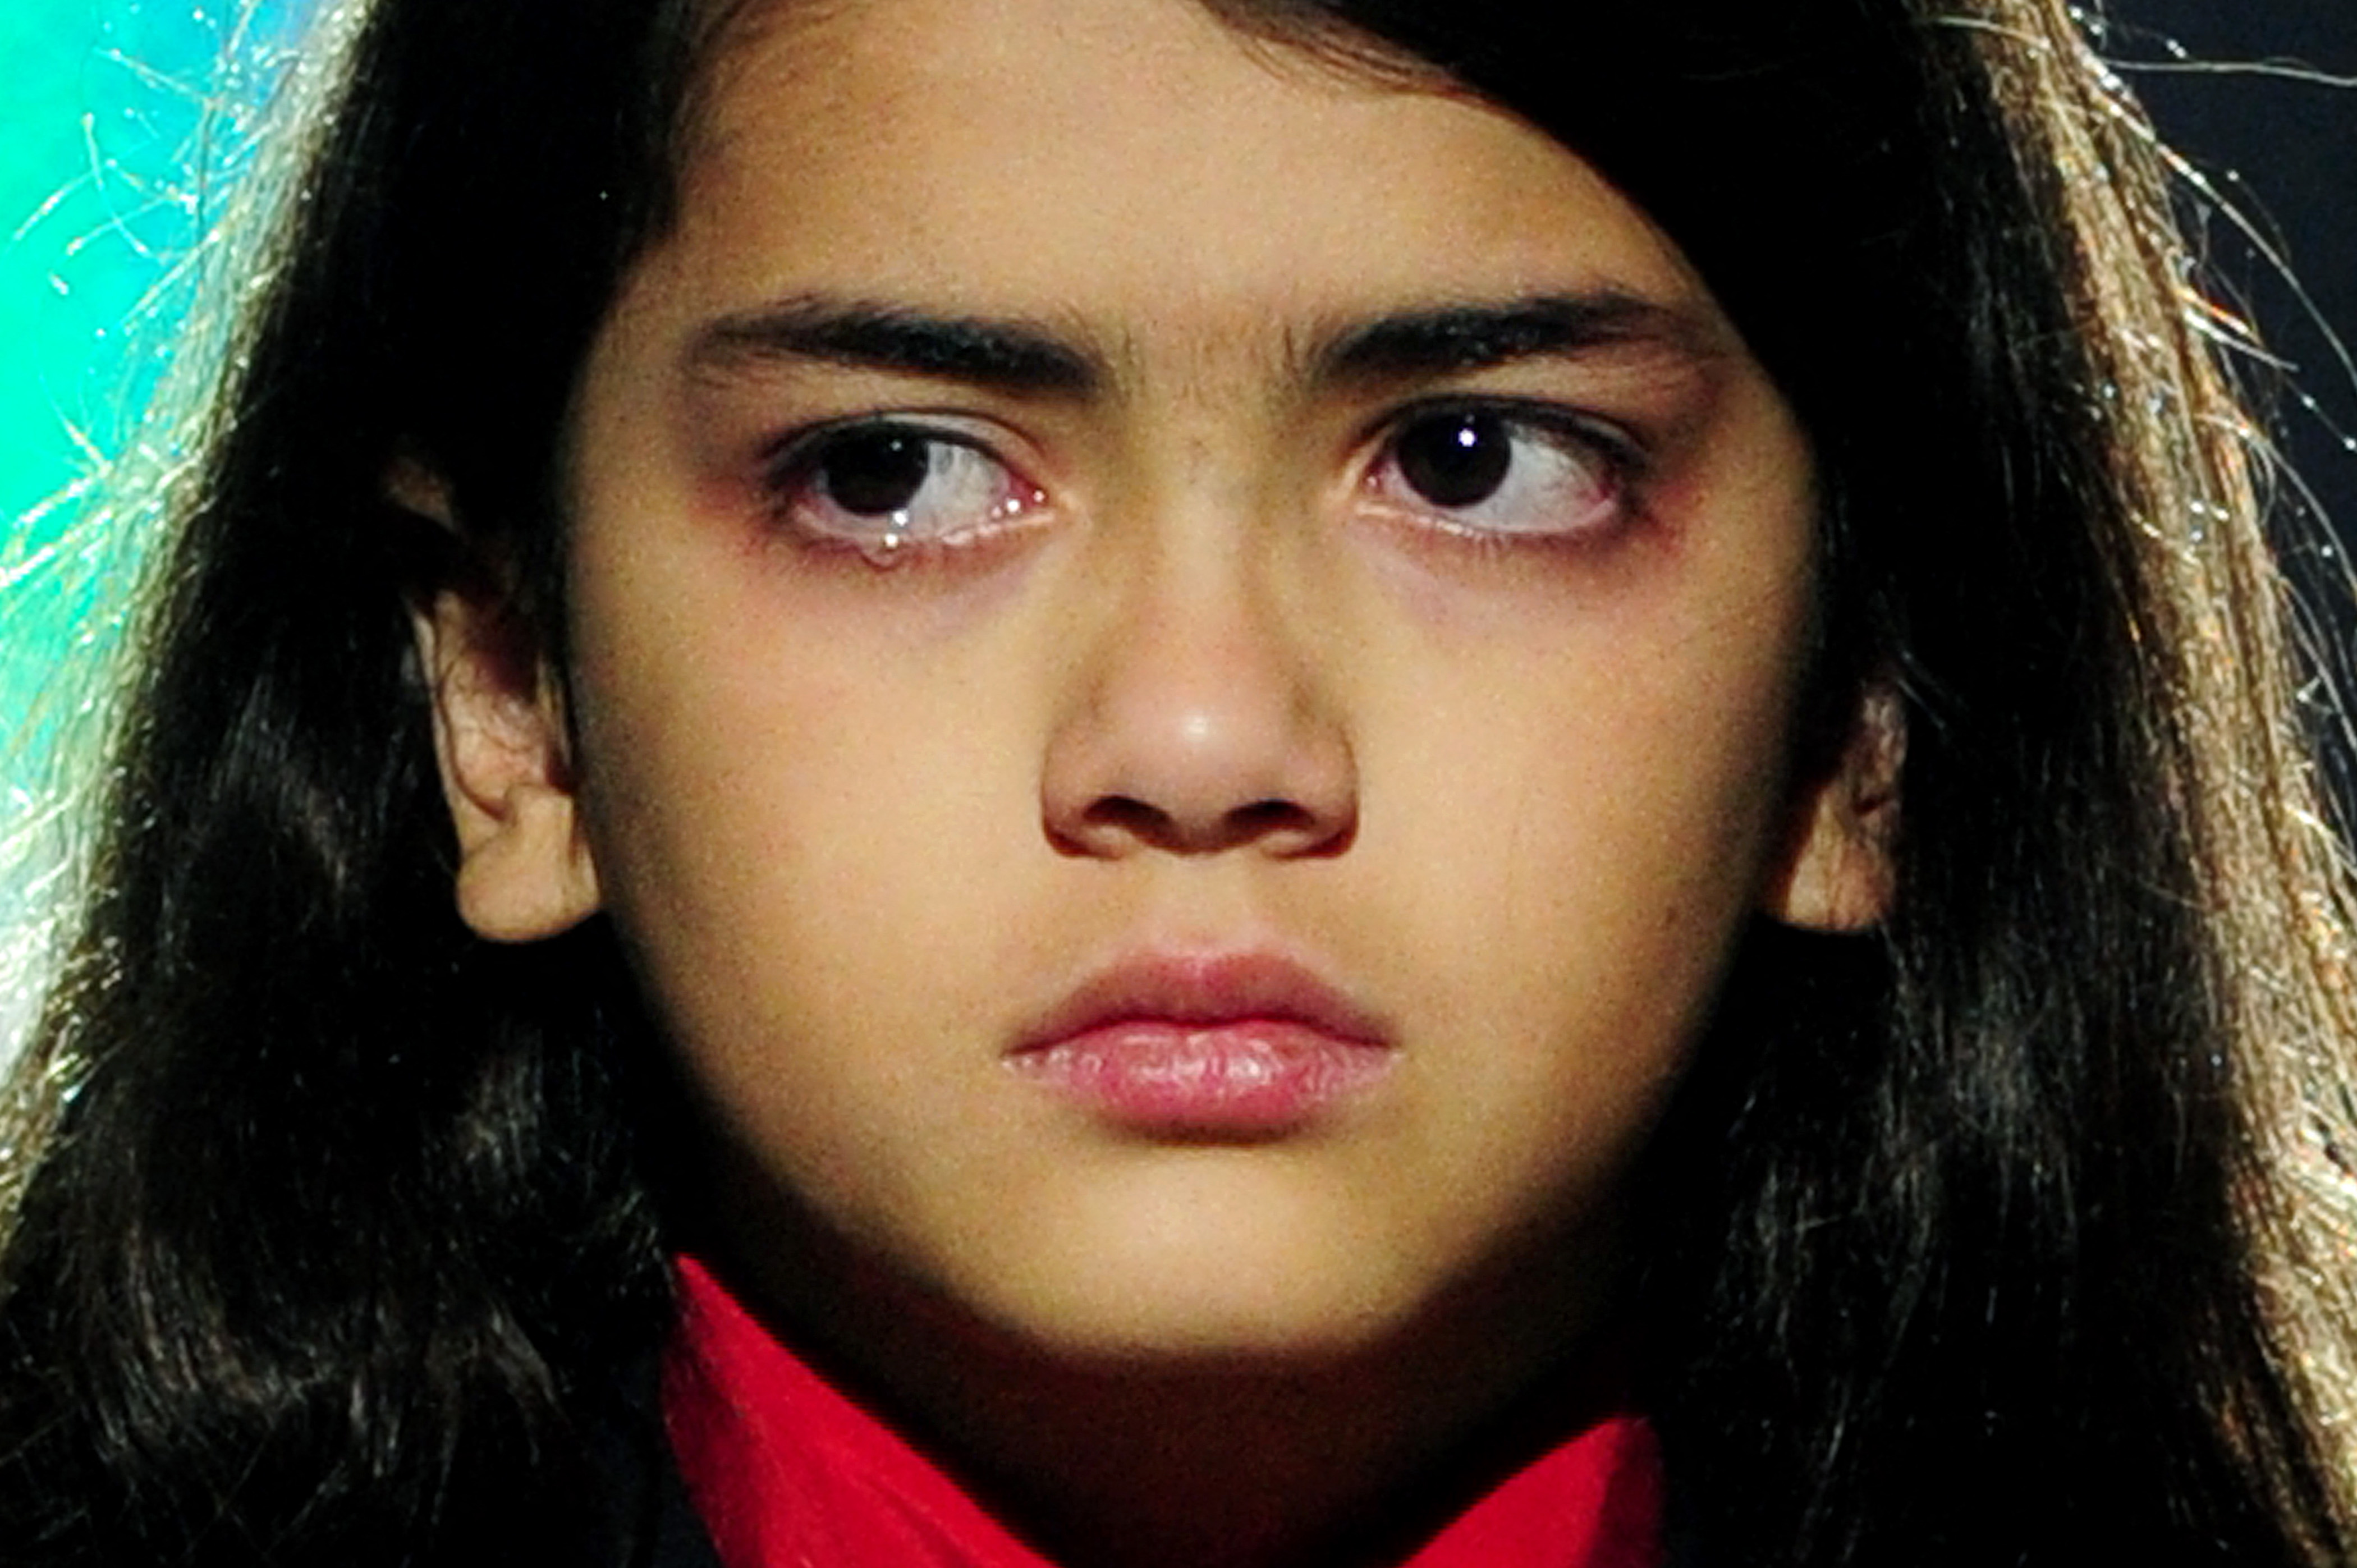 Blanket Jackson at the "Michael Forever" concert in Cardiff, Wales on October 8, 2011 | Source: Getty Images